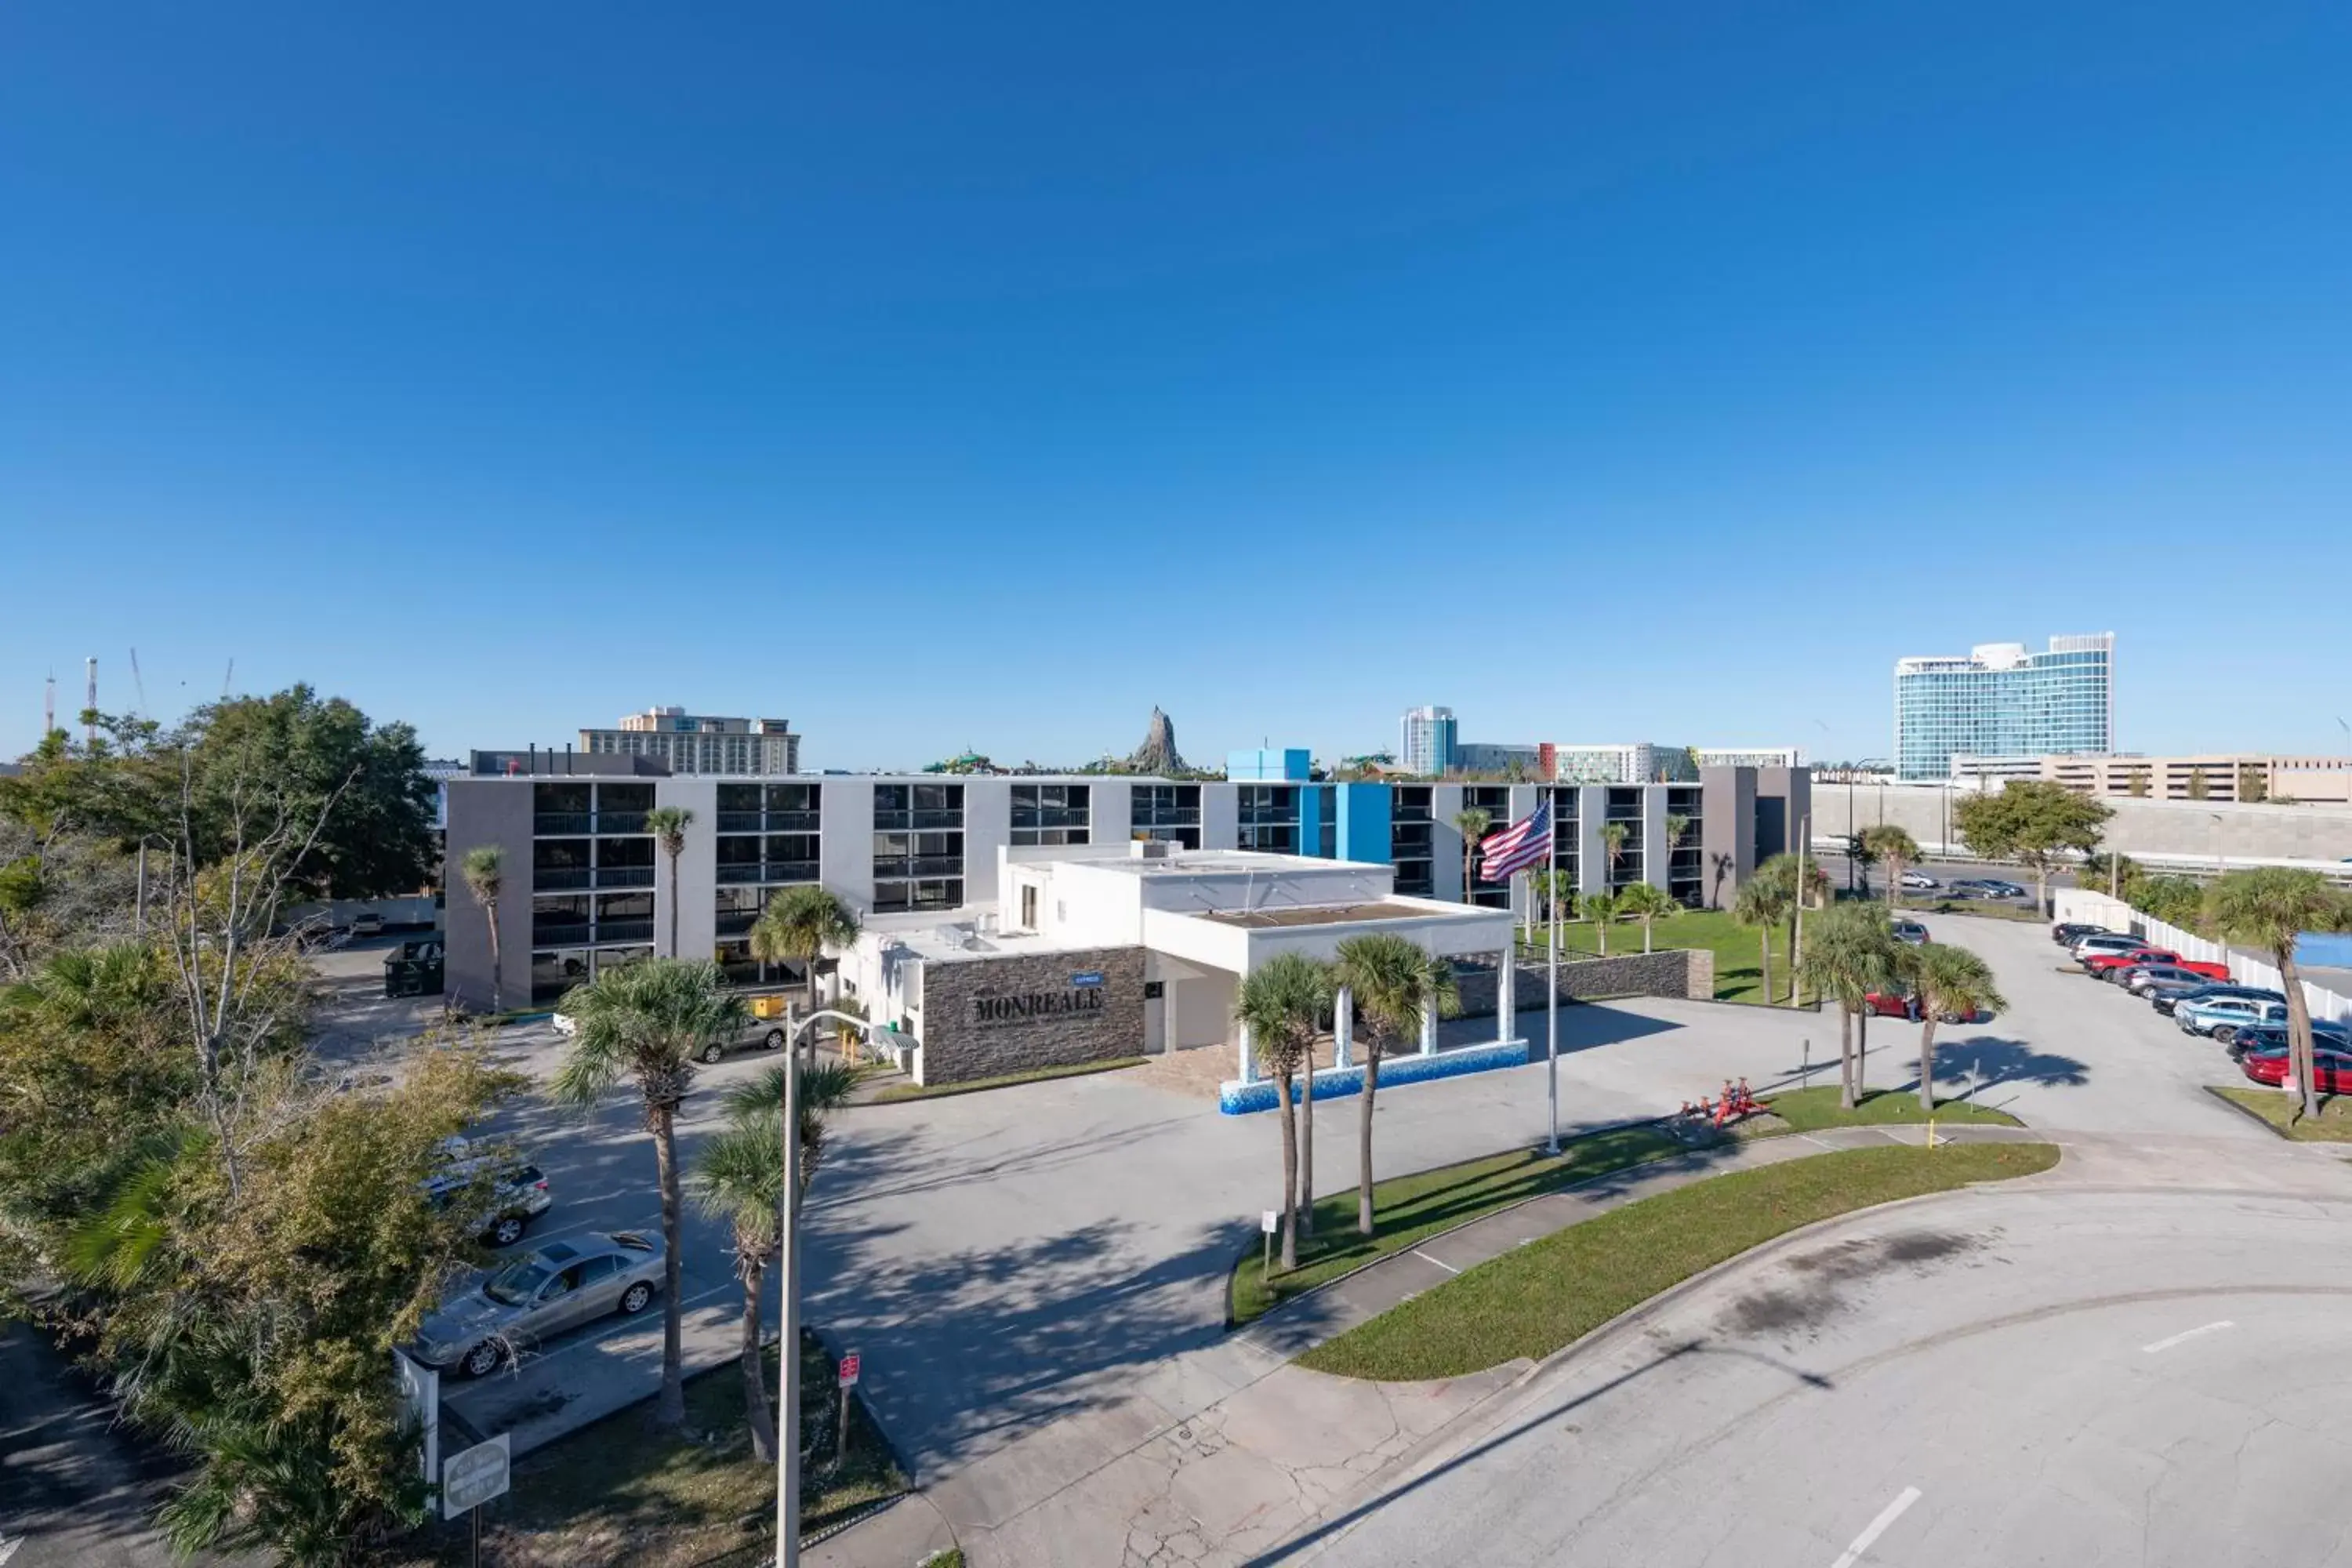 Property building in Hotel Monreale Express International Drive Orlando